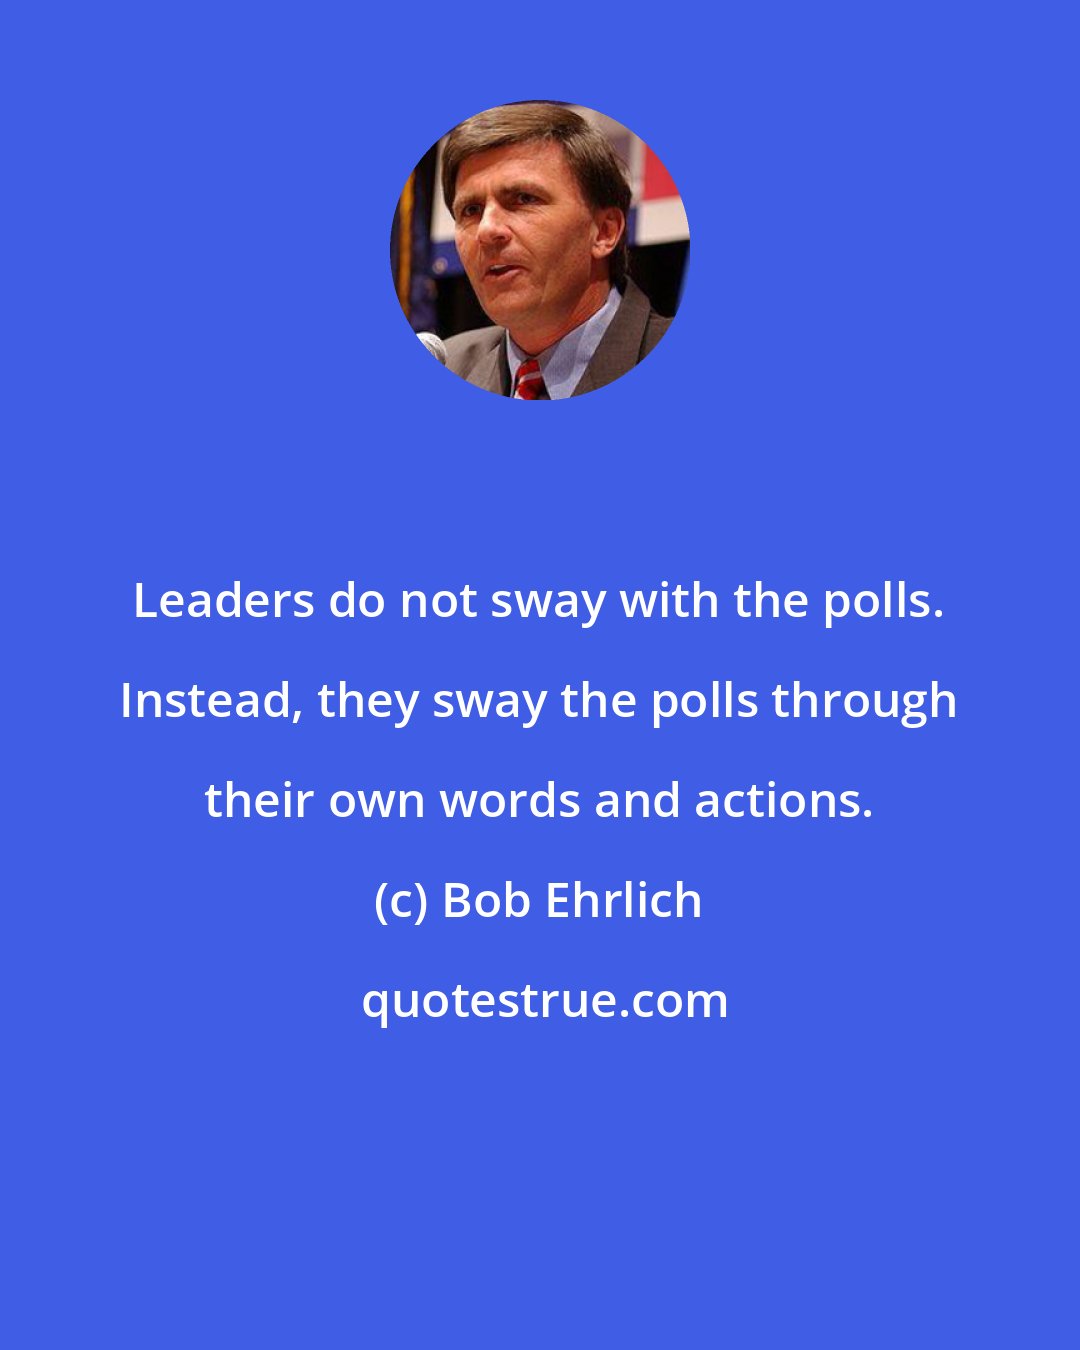 Bob Ehrlich: Leaders do not sway with the polls. Instead, they sway the polls through their own words and actions.